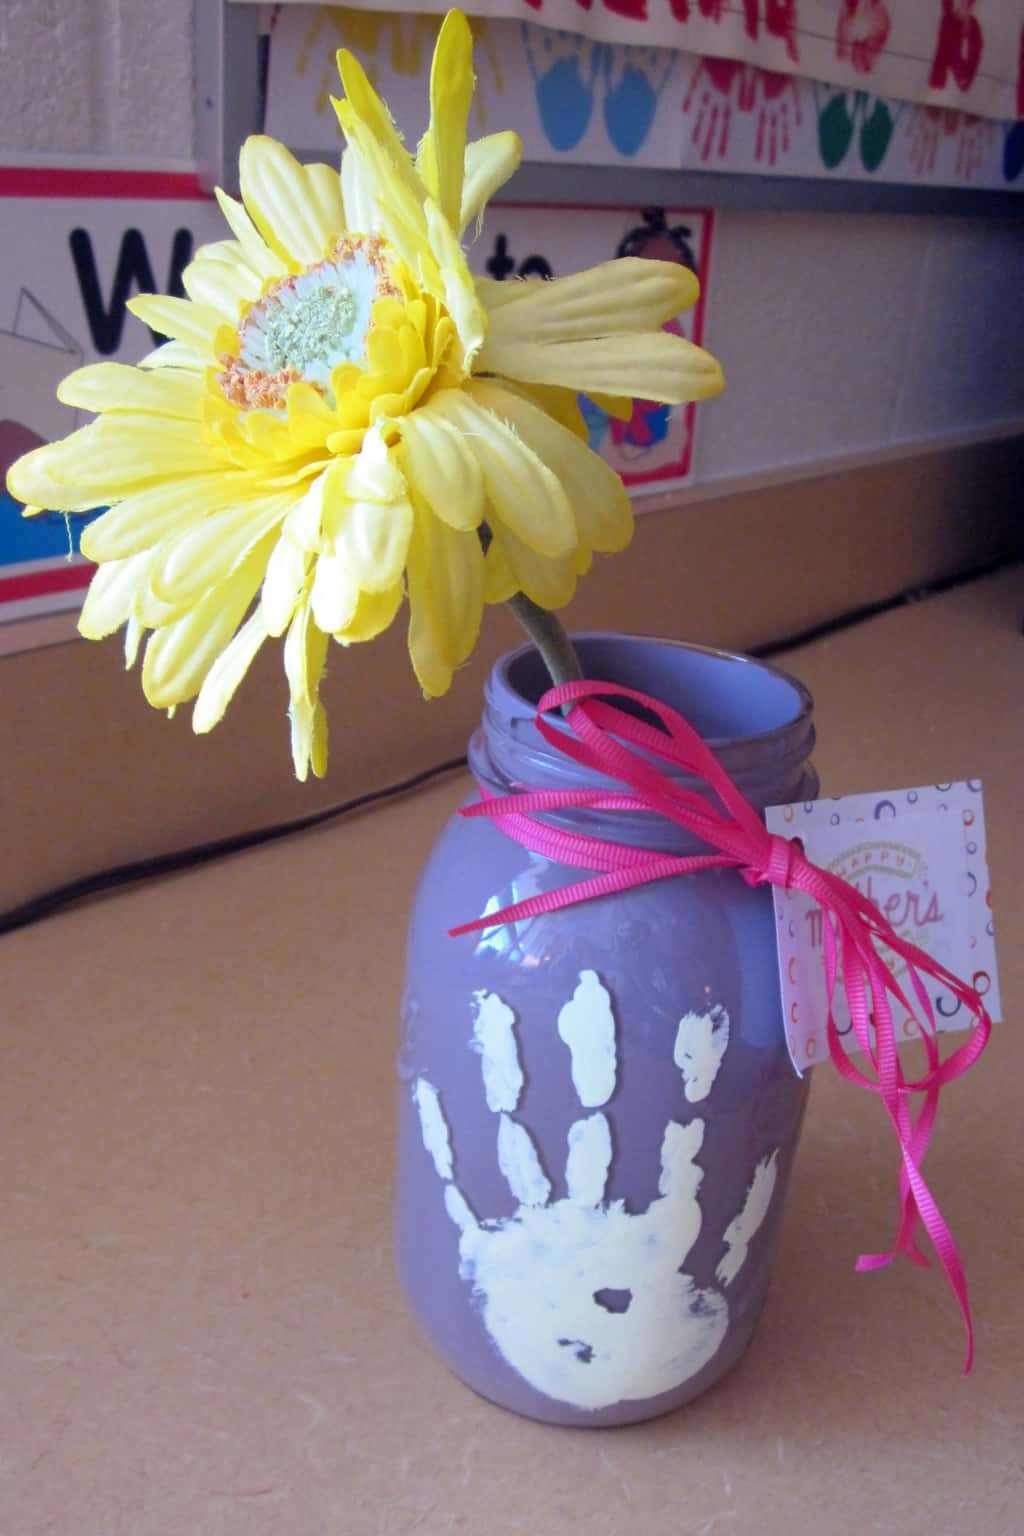 Check out this list of 10 Beautiful Mother's Day Handprint Crafts that children of all ages can make and create for the important mom figures in their lives.